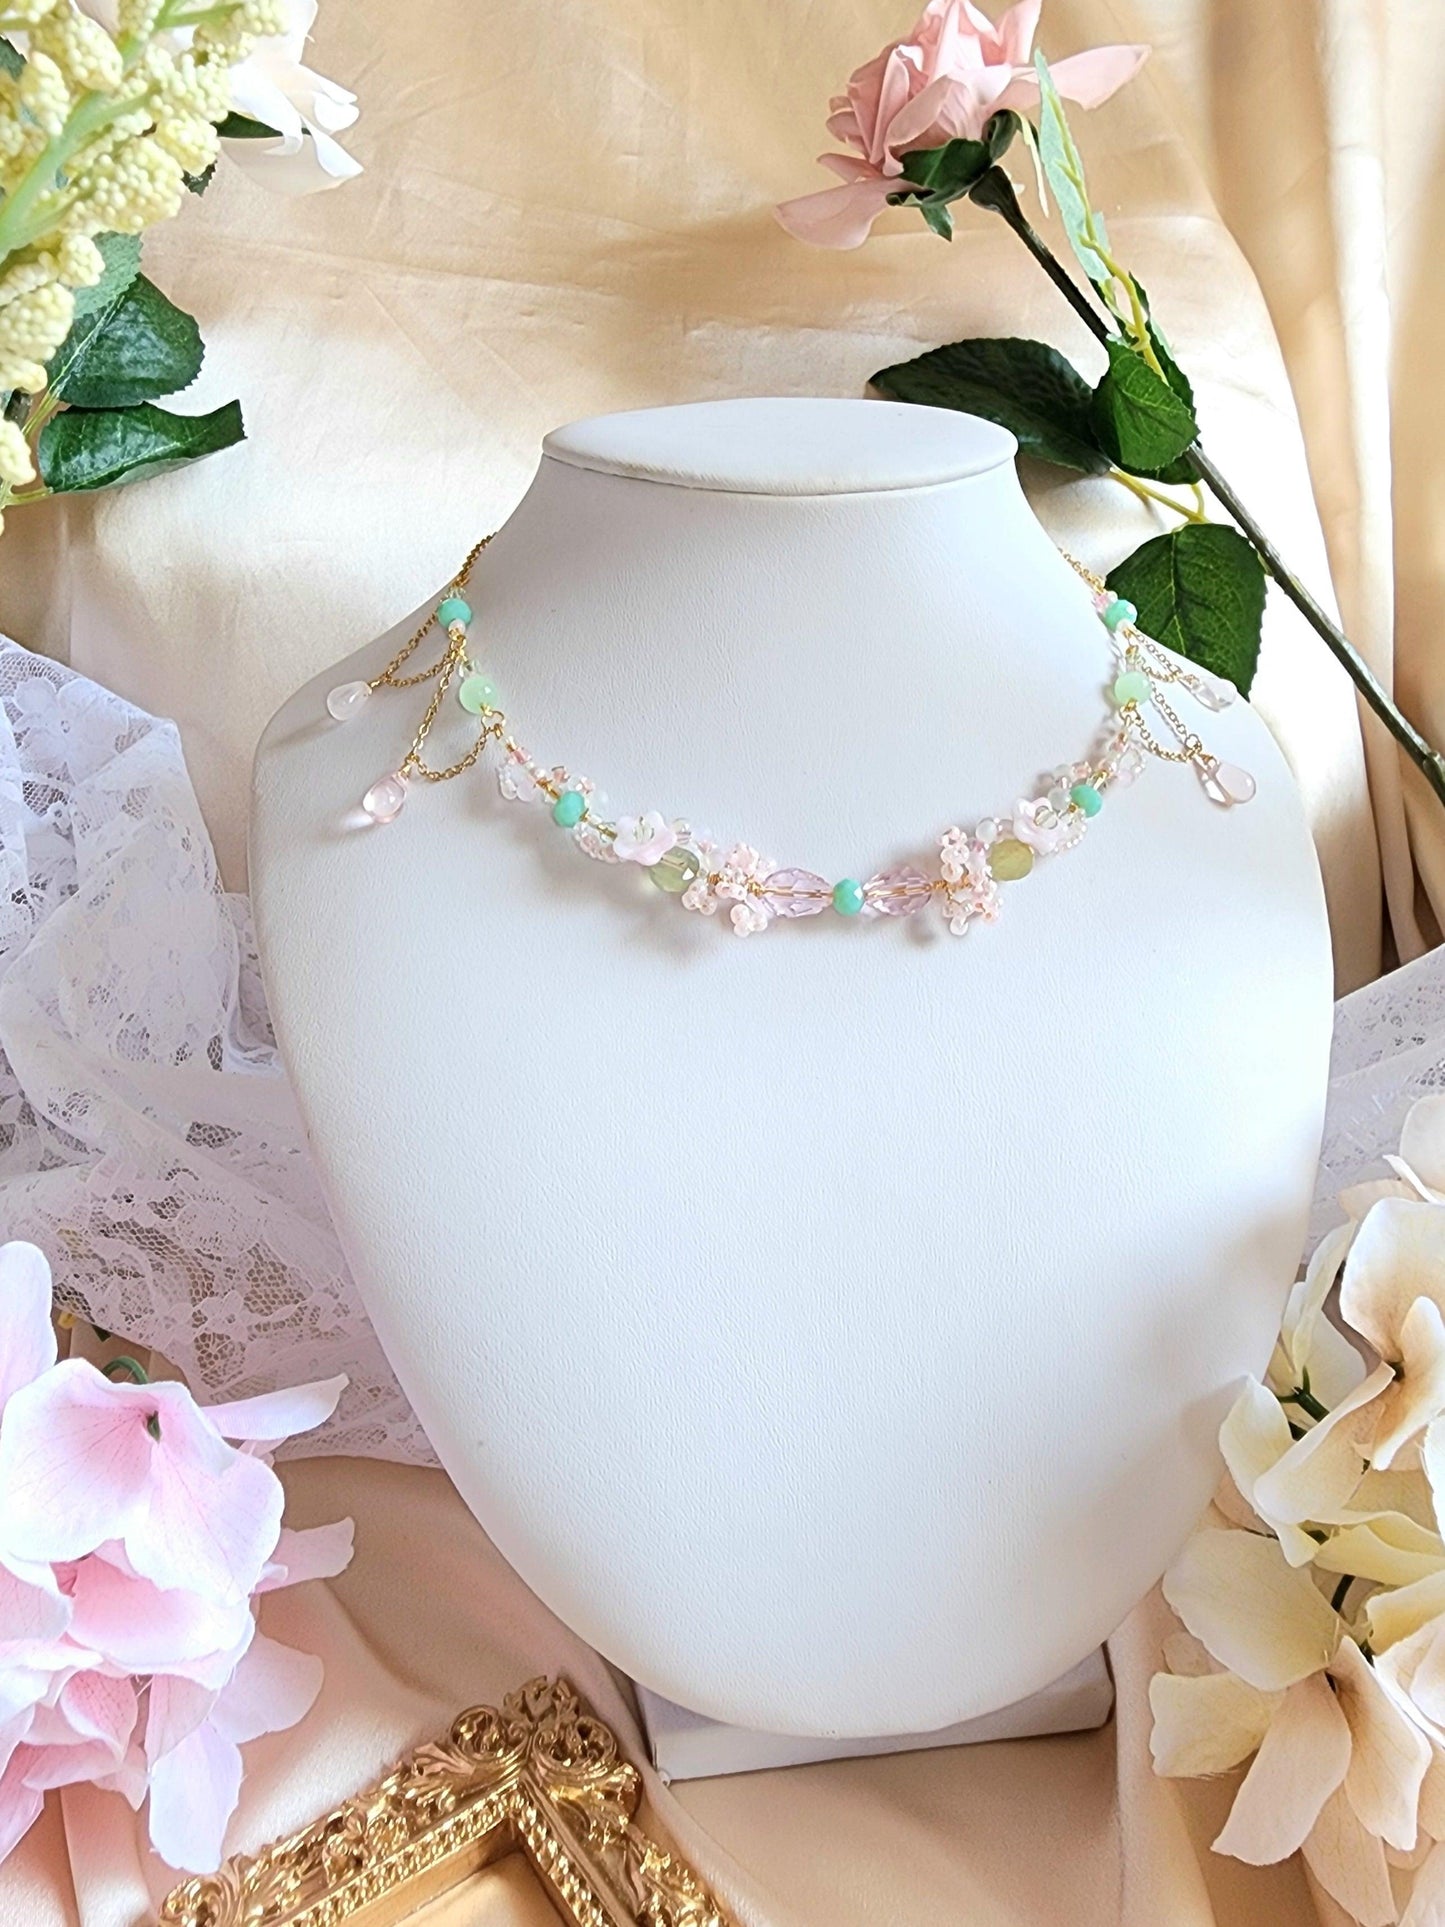 Roses are a perennial beauty surrounding the Magic Pond, captivating viewers with its emerald waters reflecting under the light of dreams. This necklace features glass beads, prehnite, Czech glass beads, brass artistic wire and gold-plated findings.